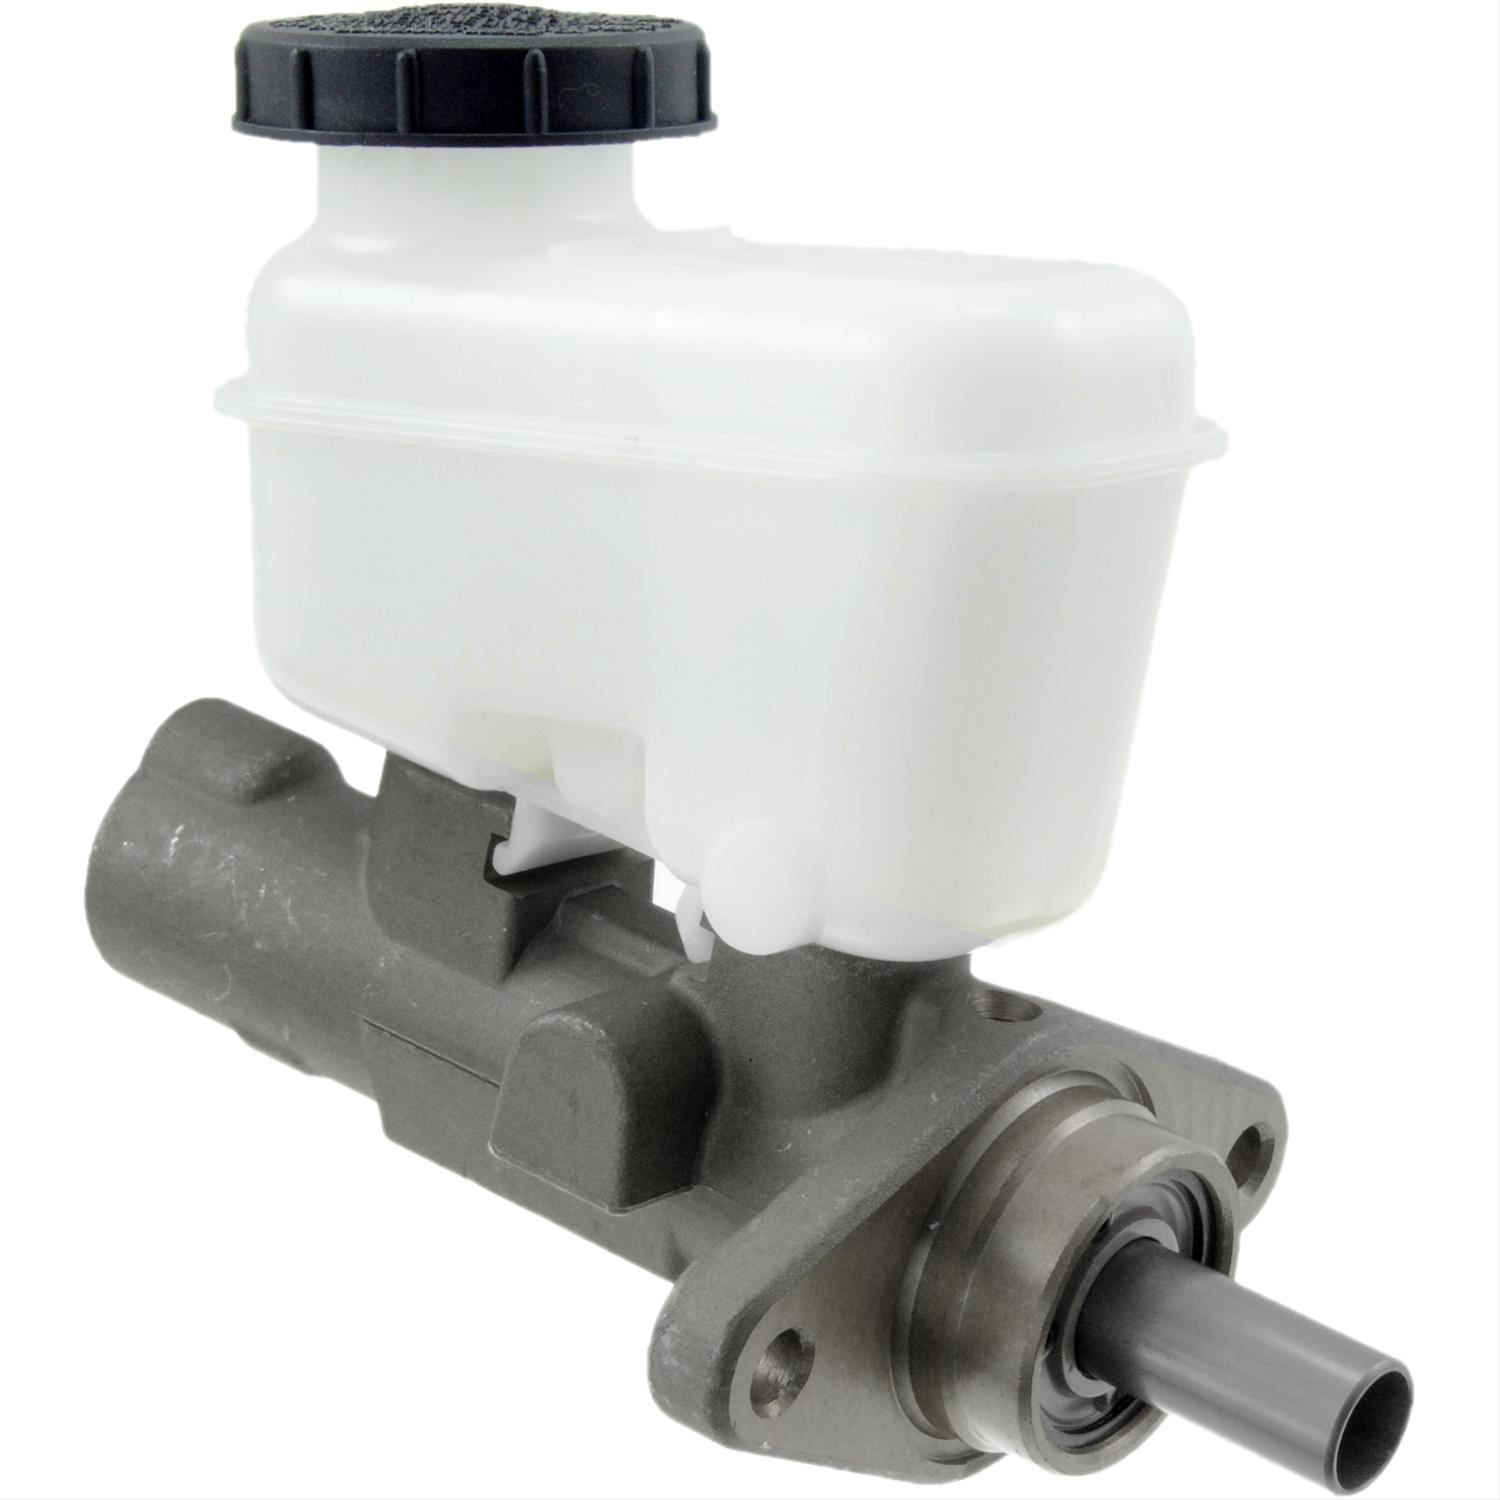 Ford master cylinder bore size #10